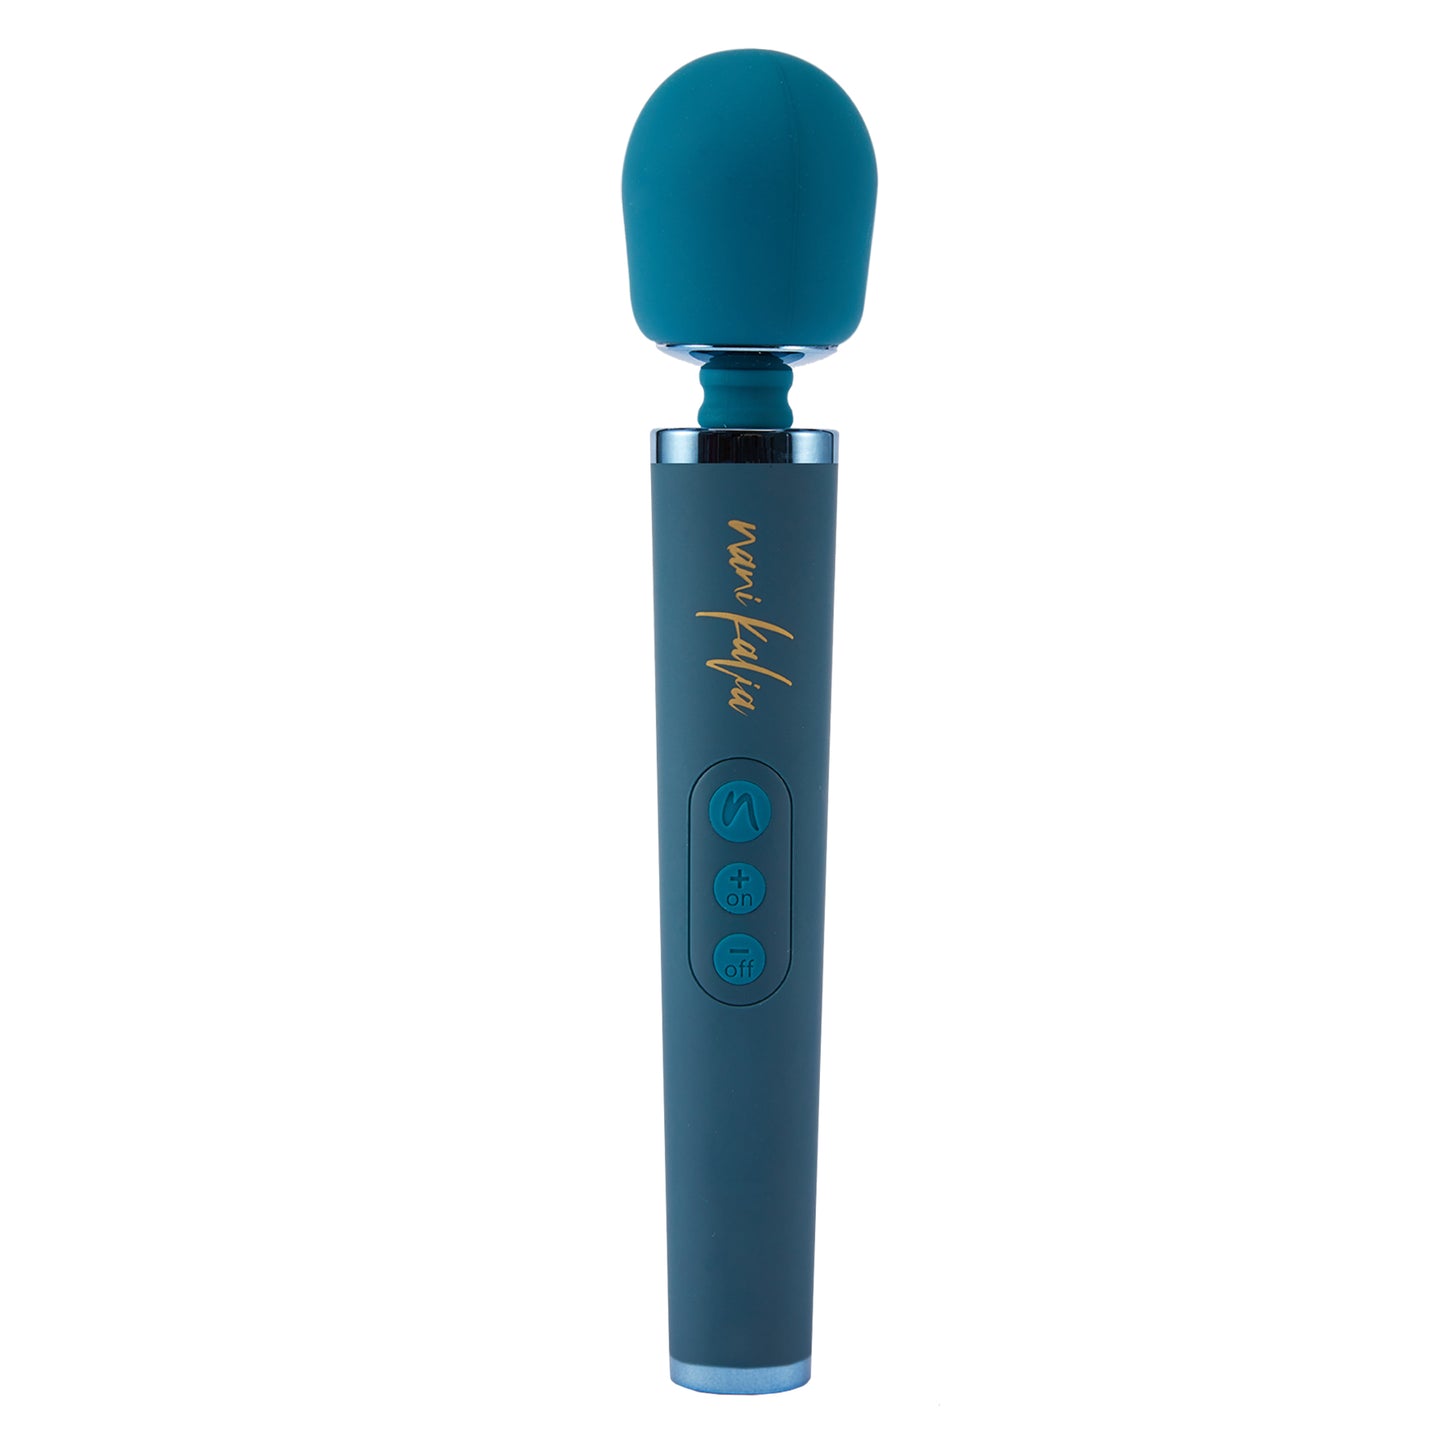 Nani Kalia Wand, Magnetic Rechargeable Waterproof Design 20 Vibration Mode Massager Fine-tuned Vibration Relaxation Function Soft High Quality Silicone (NK18 Dark Green)